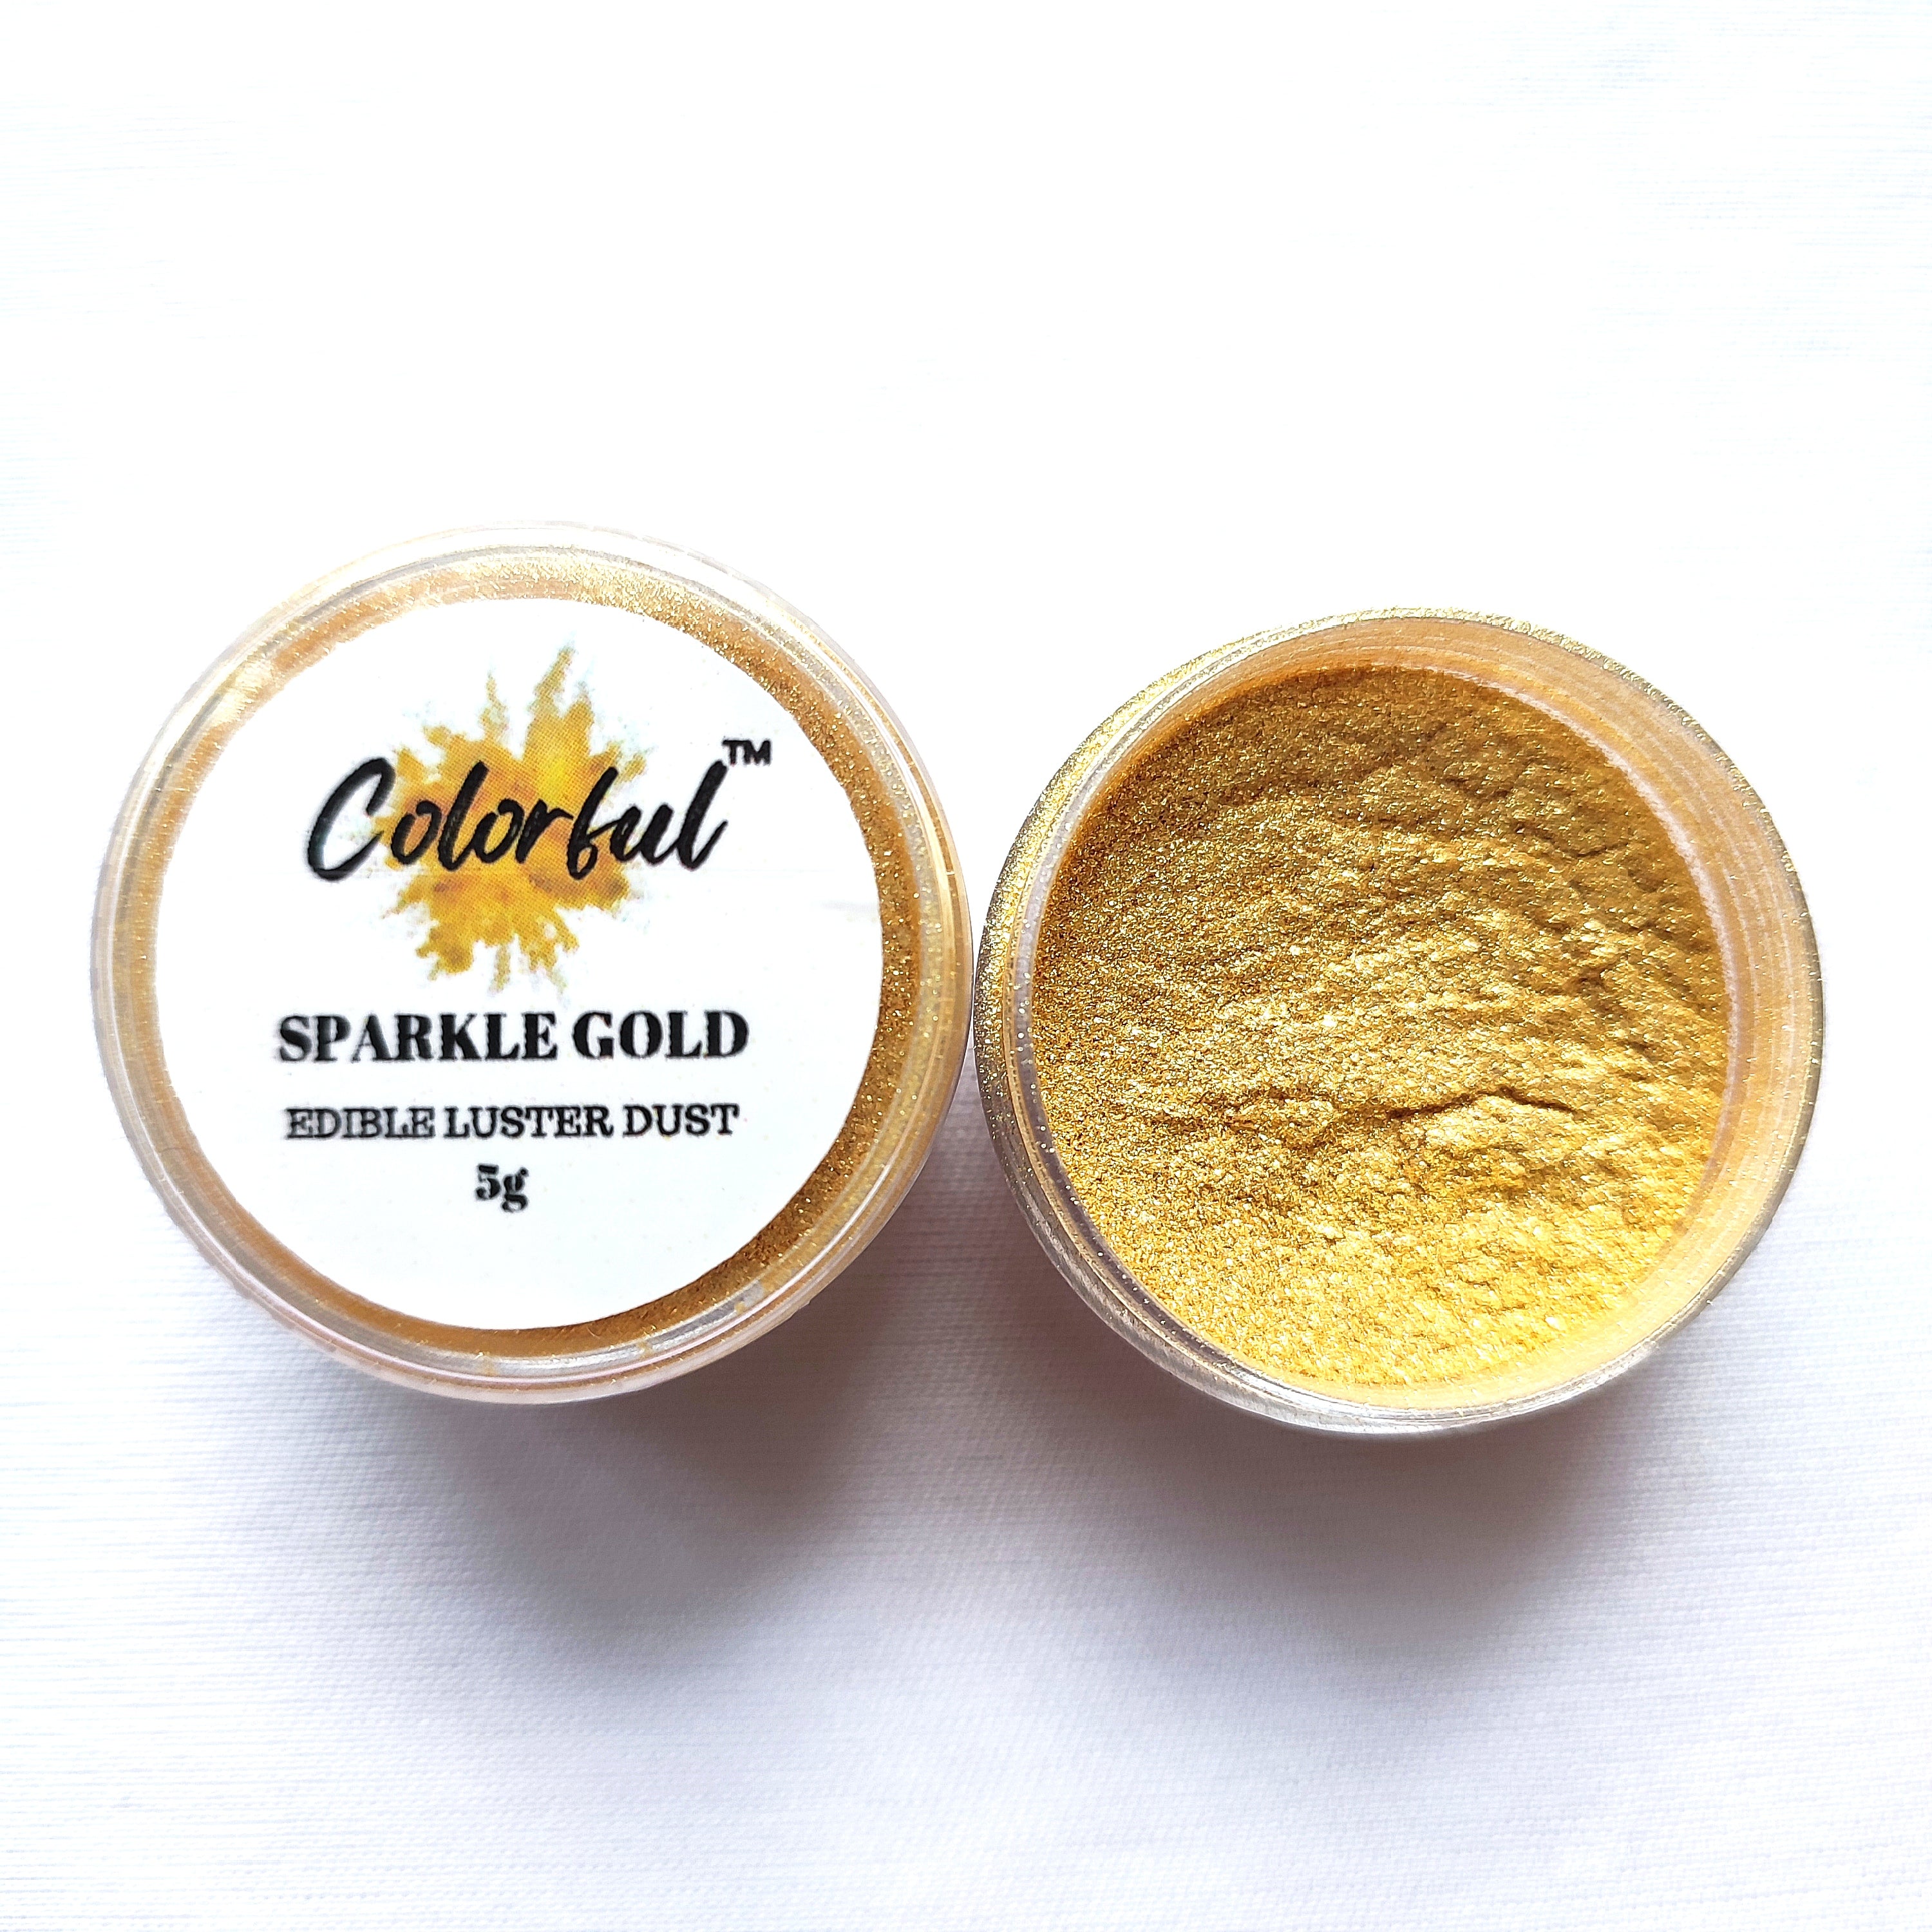 COLORFUL EDIBLE SPARKLE GOLD LUSTER DUST 5G